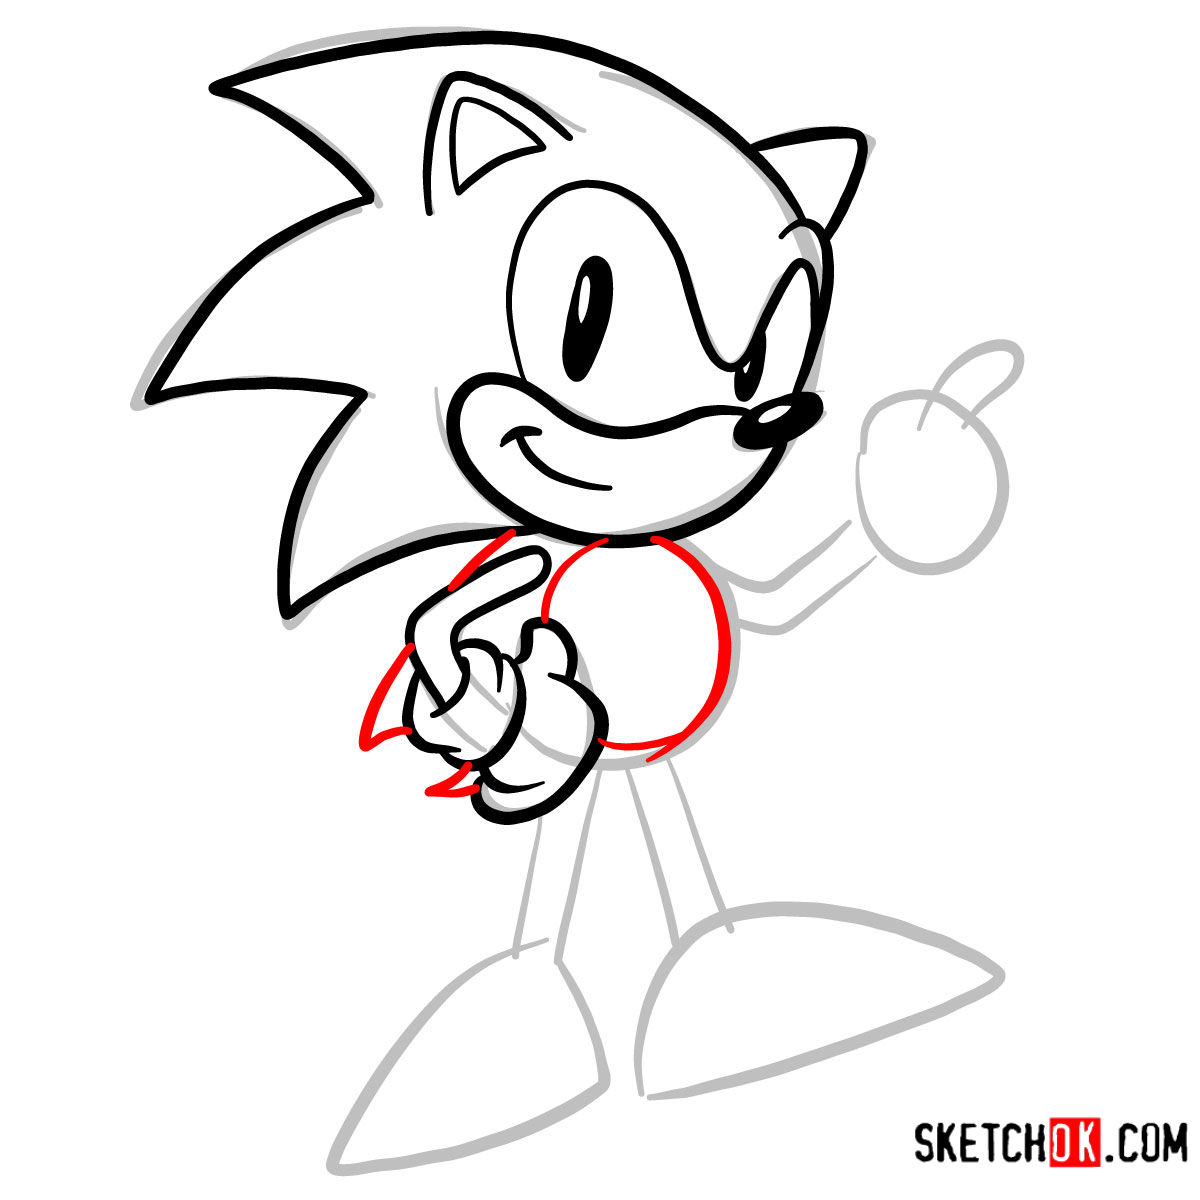 How to draw Sonic the Hedgehog SEGA games style - step 05